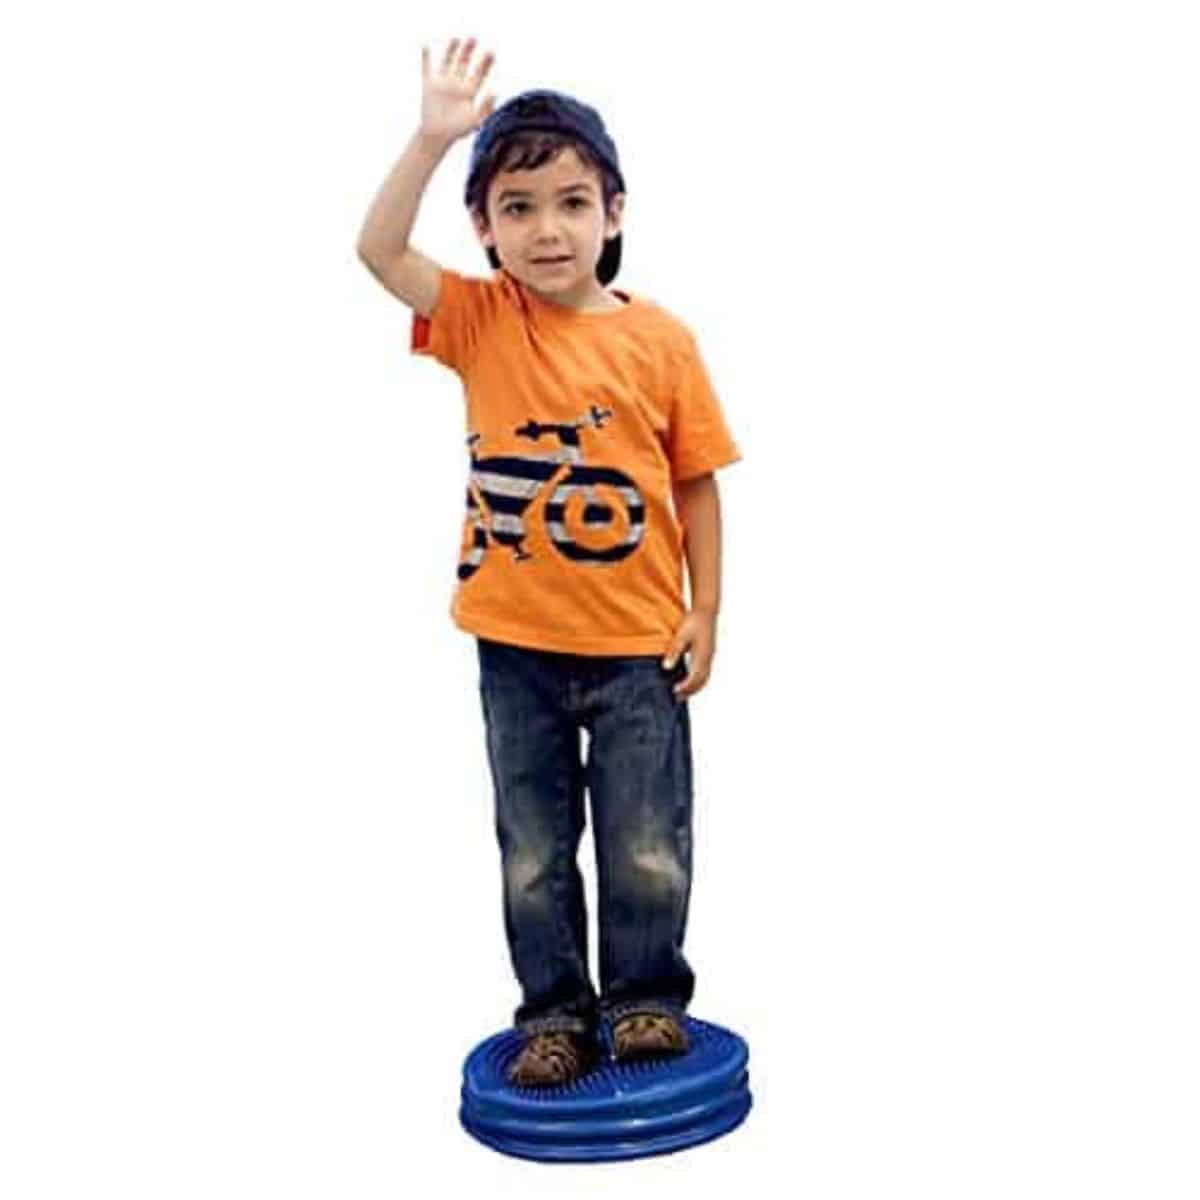 Wobble Cushions and wiggle seats can help your child with attention, staying seated, core strength, or balance. Get the best wobble cushions for 2022! 